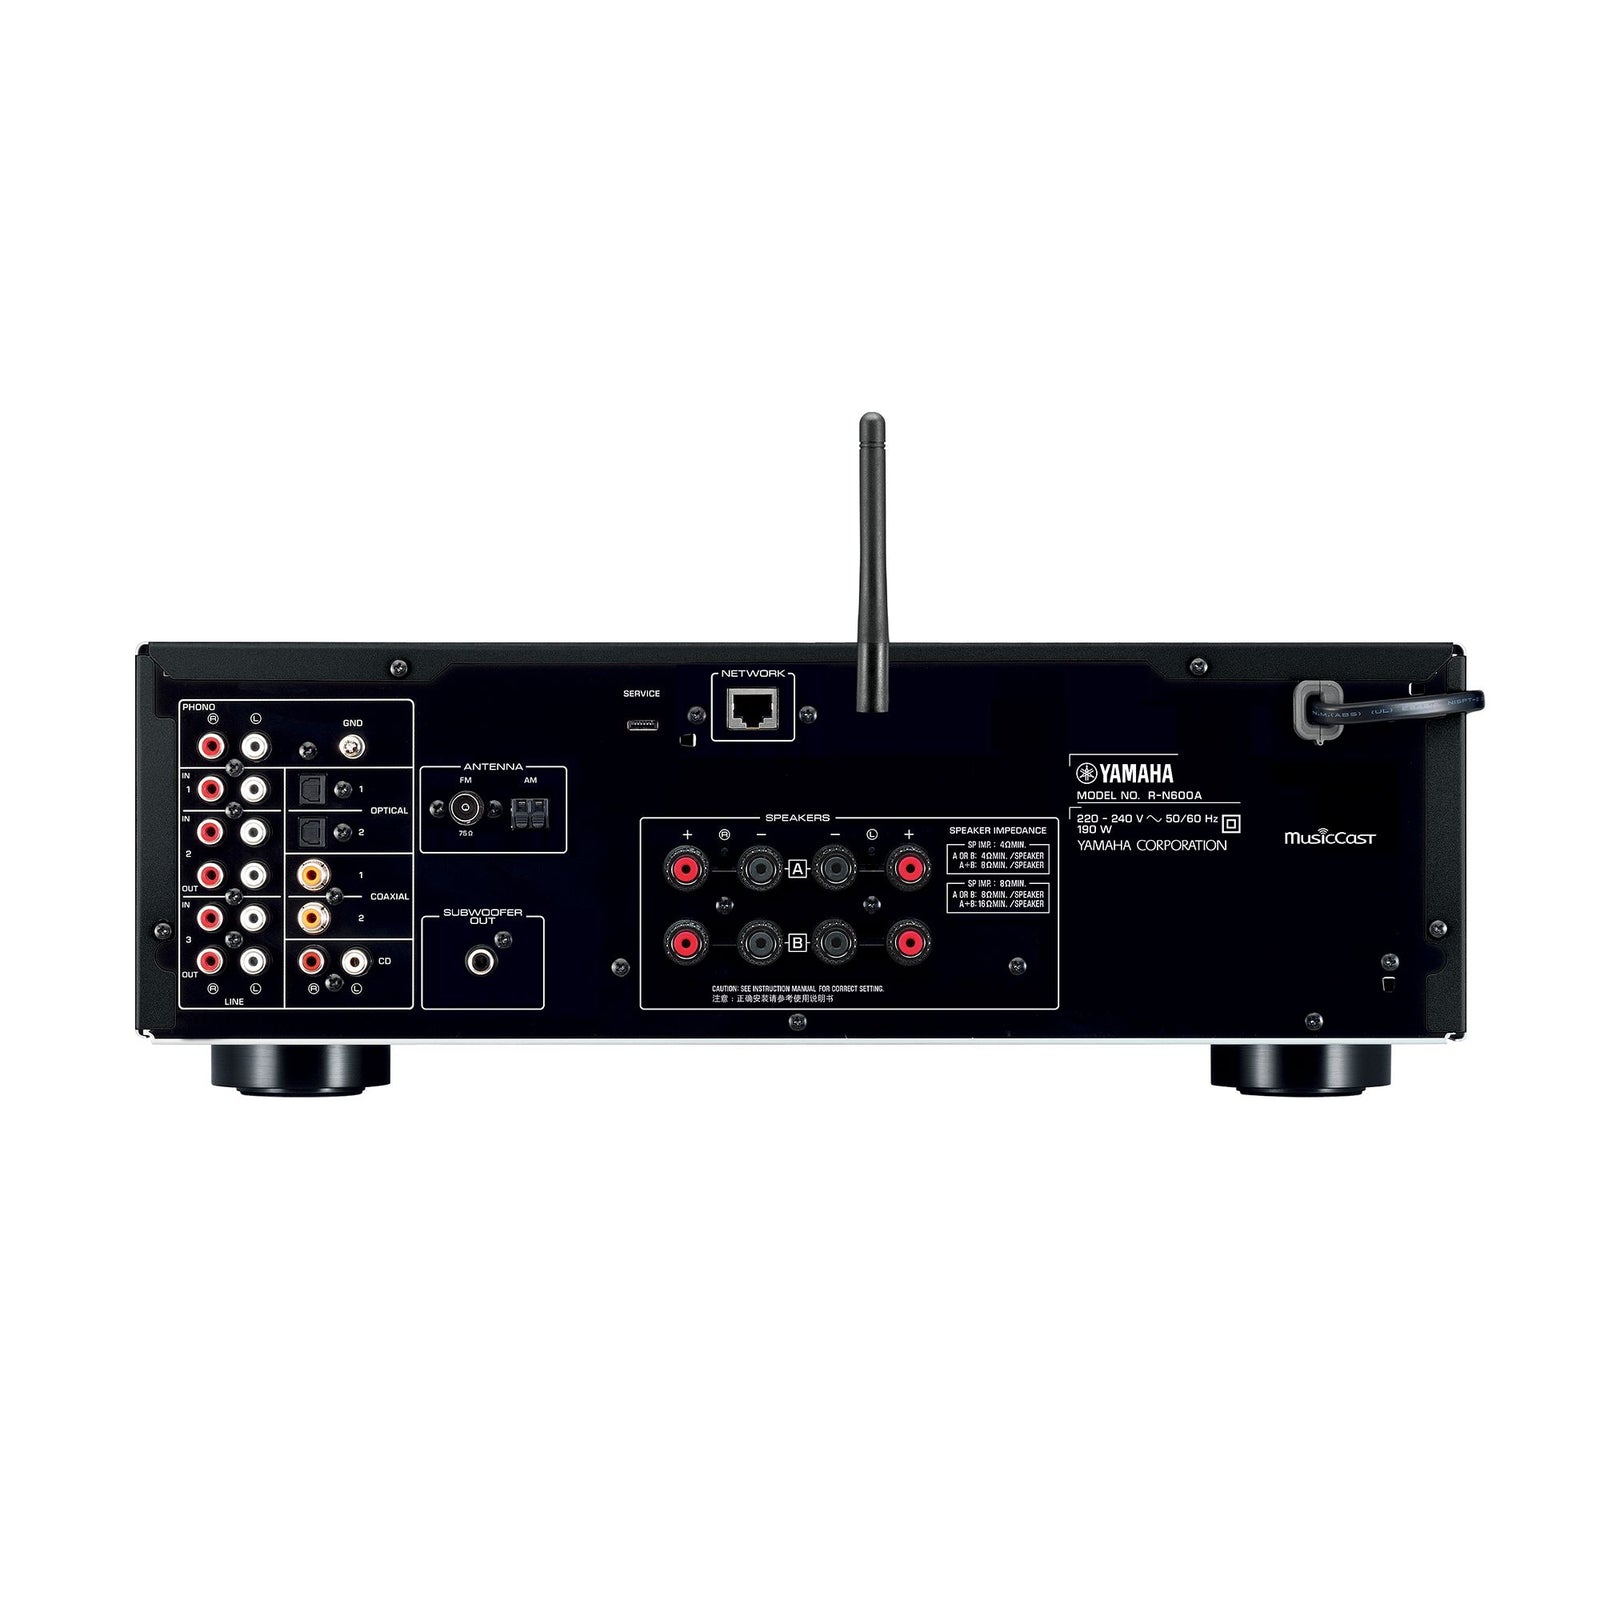 YAMAHA R-N600A NETWORK RECEIVER | VINYL SOUND The Yamaha R-N600A inherits the full-fledged Hi-Fi technology cultivated over many years. The unit is also compatible with MusicCast, giving you greater listening freedom and flexibility. Authentic Hi-Fi quality with Top-ART mechanical structure and pure direct mode